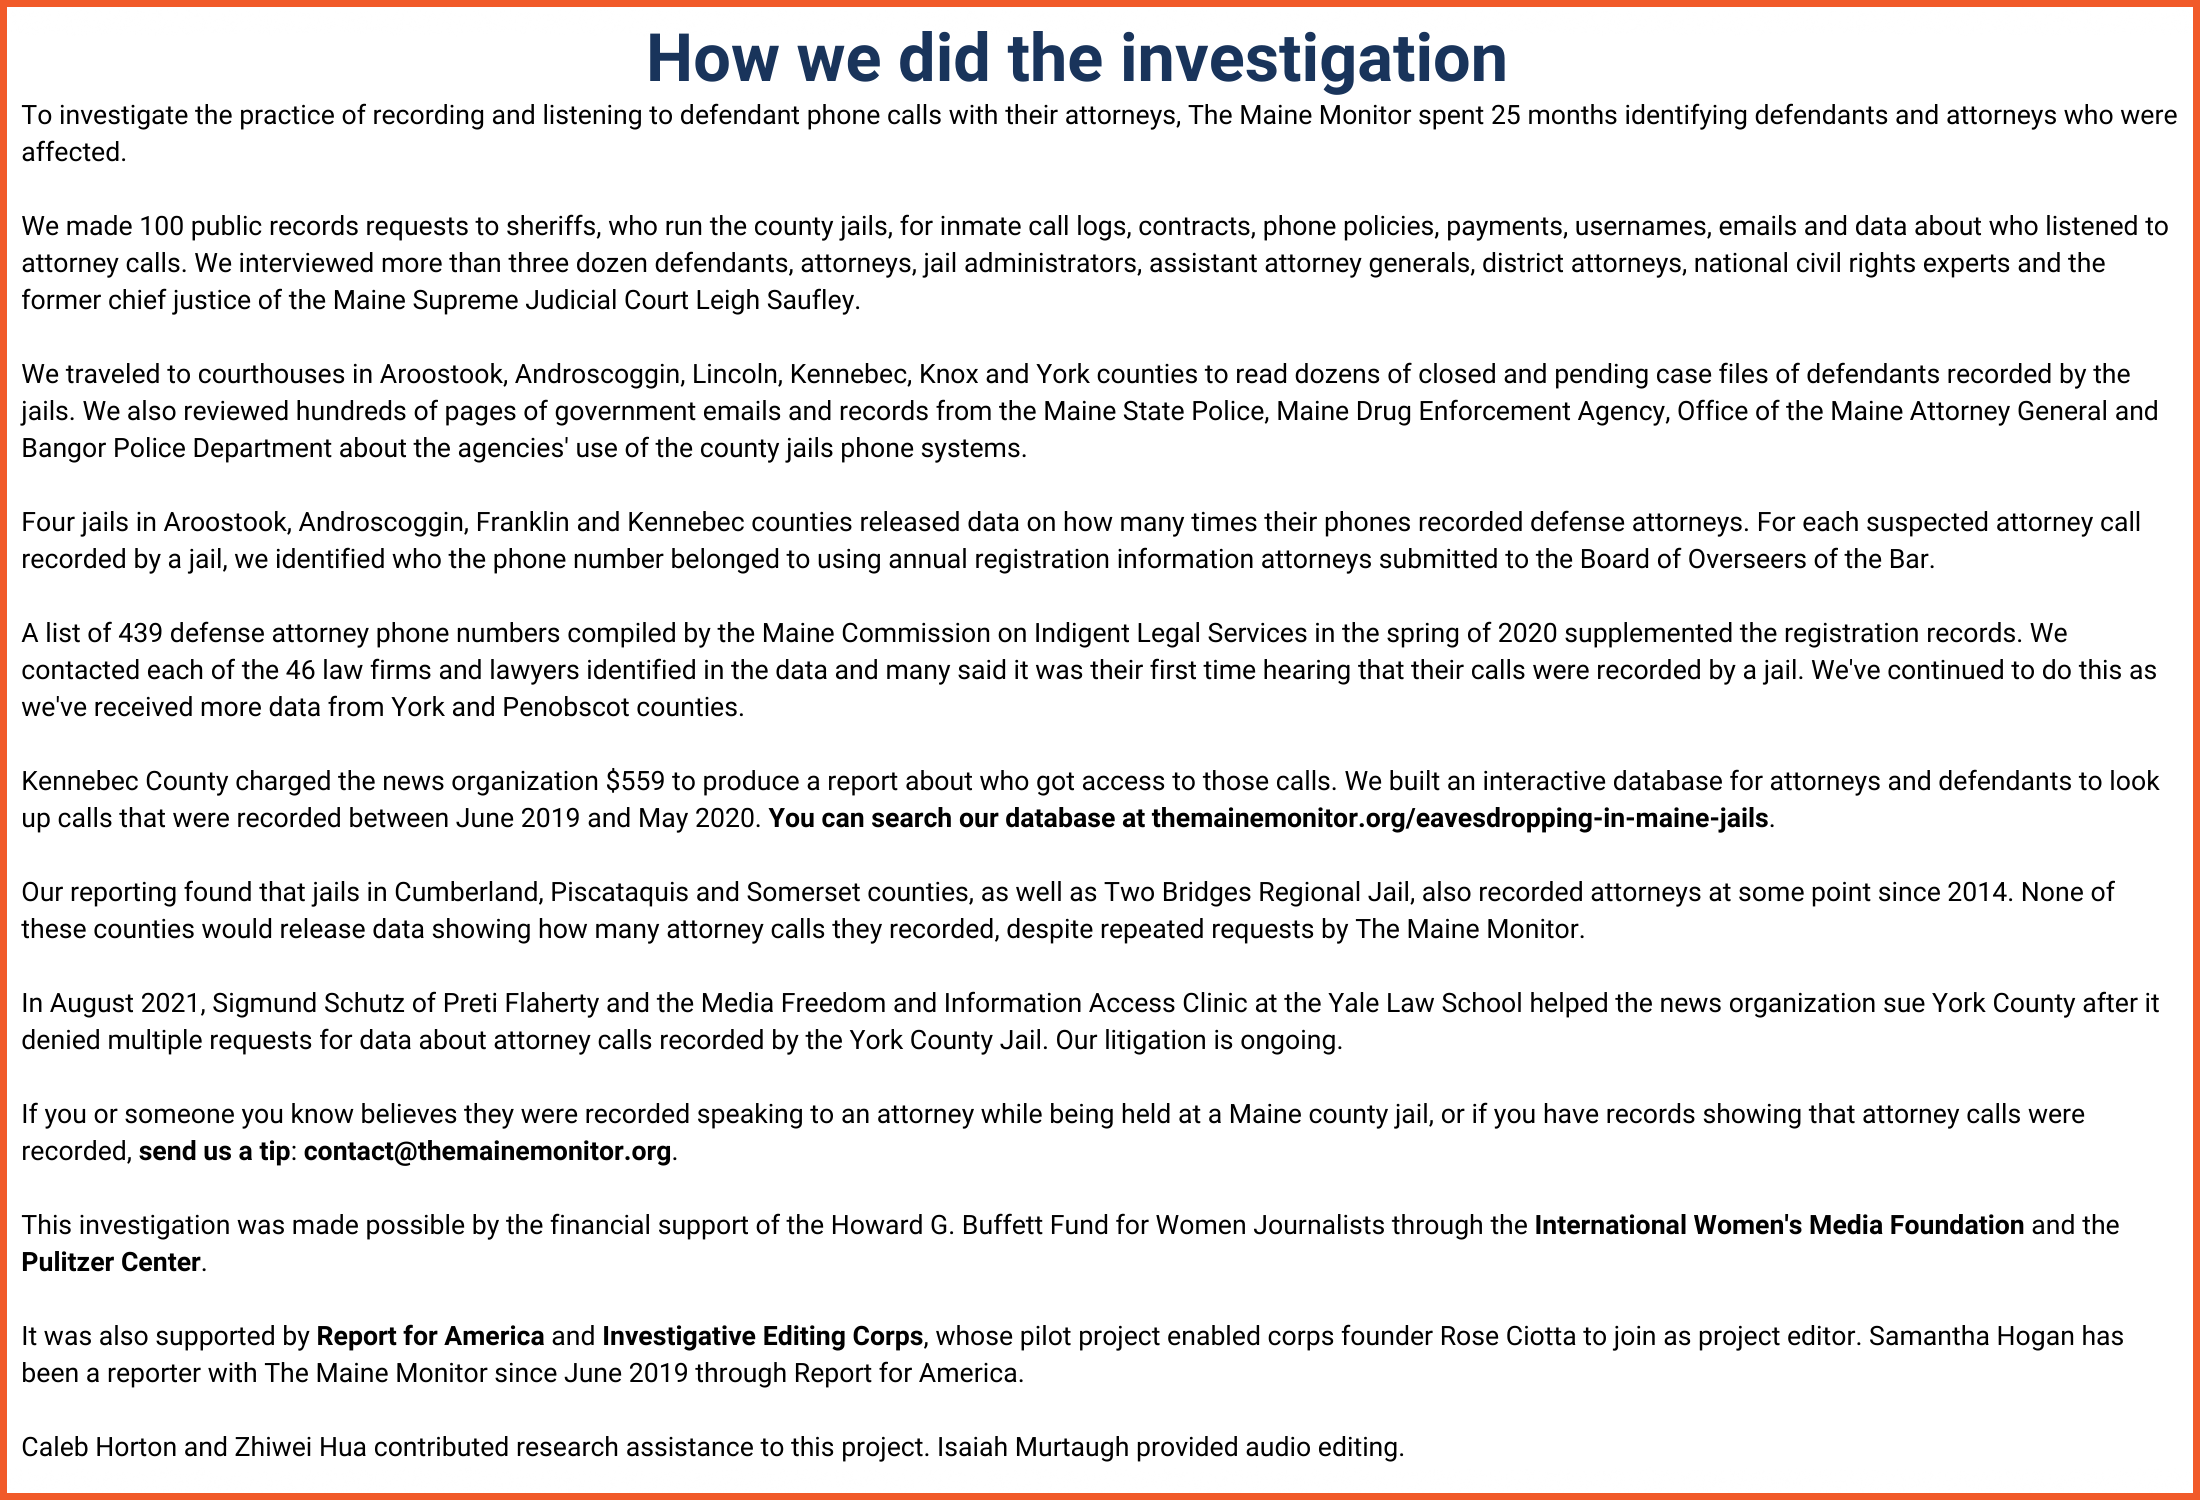 How we did the investigation. To investigate the practice of recording and listening to defendant phone calls with their attorneys, The Maine Monitor spent 25 months identifying defendants and attorneys who were affected.

We made 100 public records requests to sheriffs, who run the county jails, for inmate call logs, contracts, phone policies, payments, usernames, emails and data about who listened to attorney calls. We interviewed more than three dozen defendants, attorneys, jail administrators, assistant attorney generals, district attorneys, national civil rights experts and the former chief justice of the Maine Supreme Judicial Court Leigh Saufley.

We traveled to courthouses in Aroostook, Androscoggin, Lincoln, Kennebec, Knox and York counties to read dozens of closed and pending case files of defendants recorded by the jails. We also reviewed hundreds of pages of government emails and records from the Maine State Police, Maine Drug Enforcement Agency, Office of the Maine Attorney General and Bangor Police Department about the agencies' use of the county jails phone systems.

Four jails in Aroostook, Androscoggin, Franklin and Kennebec counties released data on how many times their phones recorded defense attorneys. For each suspected attorney call recorded by a jail, we identified who the phone number belonged to using annual registration information attorneys submitted to the Board of Overseers of the Bar.

A list of 439 defense attorney phone numbers compiled by the Maine Commission on Indigent Legal Services in the spring of 2020 supplemented the registration records. We contacted each of the 46 law firms and lawyers identified in the data and many said it was their first time hearing that their calls were recorded by a jail. We've continued to do this as we've received more data from York and Penobscot counties.

Kennebec County charged the news organization $559 to produce a report about who got access to those calls. We built an interactive database for attorneys and defendants to look up calls that were recorded between June 2019 and May 2020. You can search our database here.

Our reporting found that jails in Cumberland, Piscataquis and Somerset counties, as well as Two Bridges Regional Jail, also recorded attorneys at some point since 2014. None of these counties would release data showing how many attorney calls they recorded, despite repeated requests by The Maine Monitor.

In August 2021, Sigmund Schutz of Preti Flaherty and the Media Freedom and Information Access Clinic at the Yale Law School helped the news organization sue York County after it denied multiple requests for data about attorney calls recorded by the York County Jail. Our litigation is ongoing.

If you or someone you know believes they were recorded speaking to an attorney while being held at a Maine county jail, or if you have records showing that attorney calls were recorded, send us a tip here.

This investigation was made possible by the financial support of the Howard G. Buffett Fund for Women Journalists through the International Women's Media Foundation and the Pulitzer Center.

It was also supported by Report for America and Investigative Editing Corps, whose pilot project enabled corps founder Rose Ciotta to join as project editor. Samantha Hogan has been a reporter with The Maine Monitor since June 2019 through Report for America.

Caleb Horton and Zhiwei Hua contributed research assistance to this project. Isaiah Murtaugh provided audio editing.